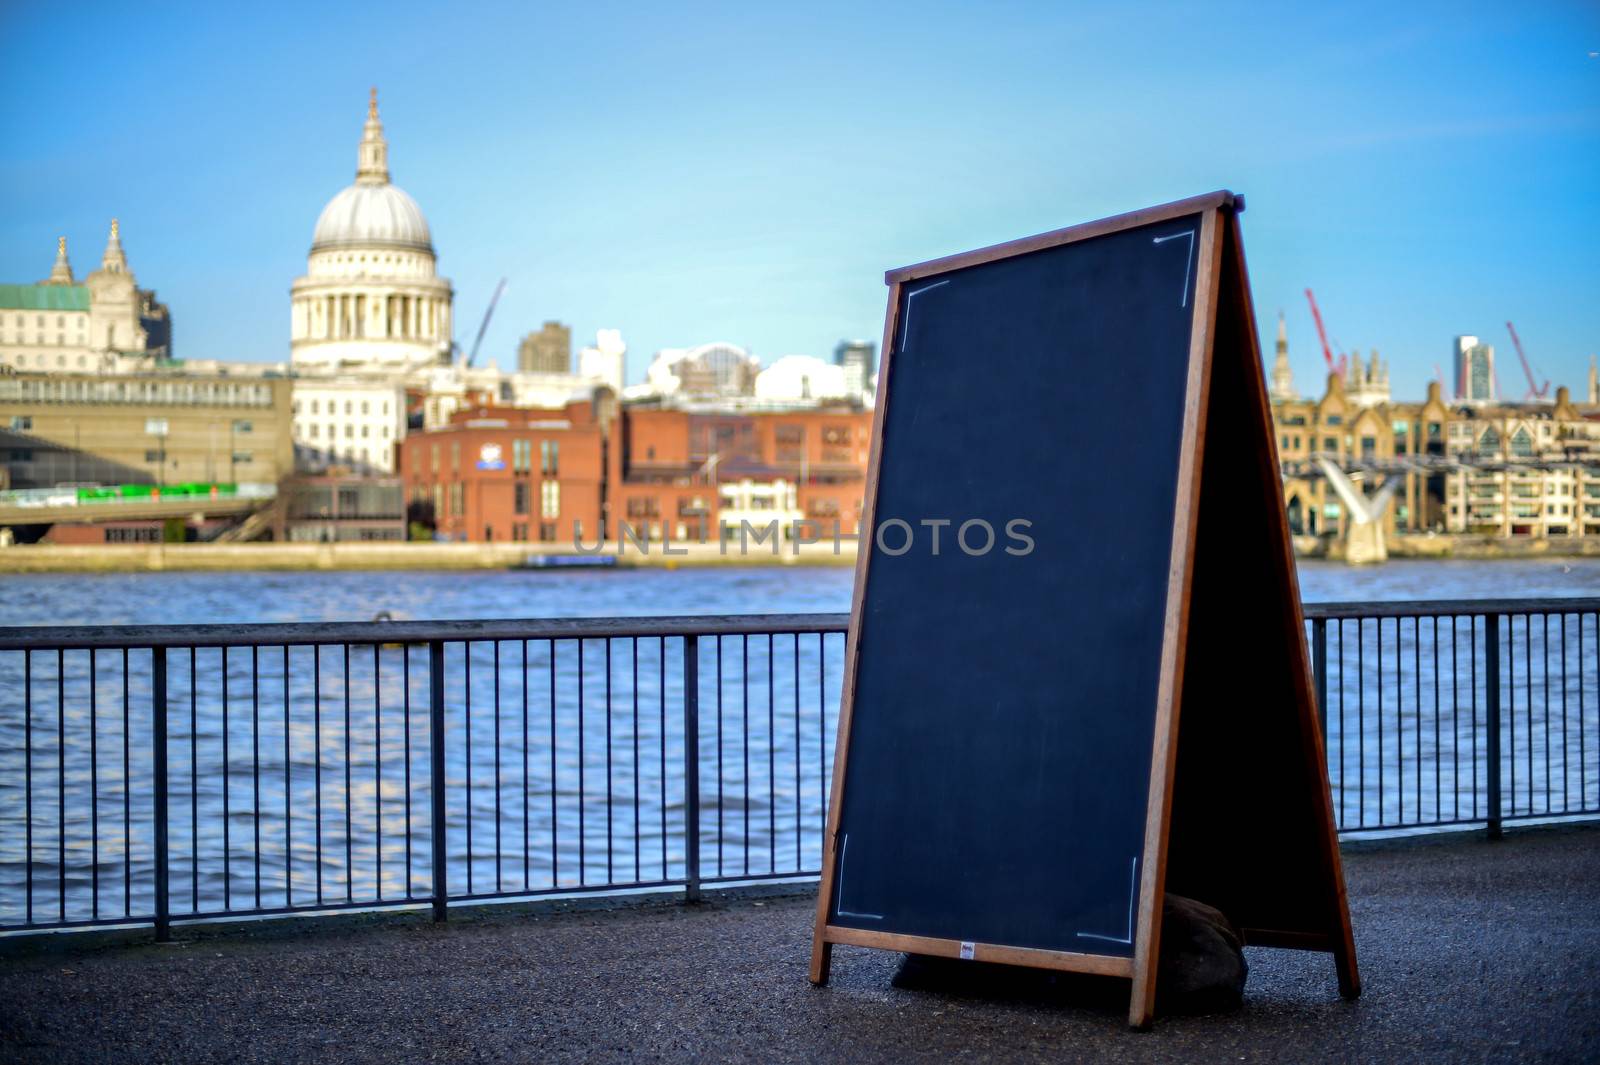 A view of St Paul's Cathedral, South Bank London